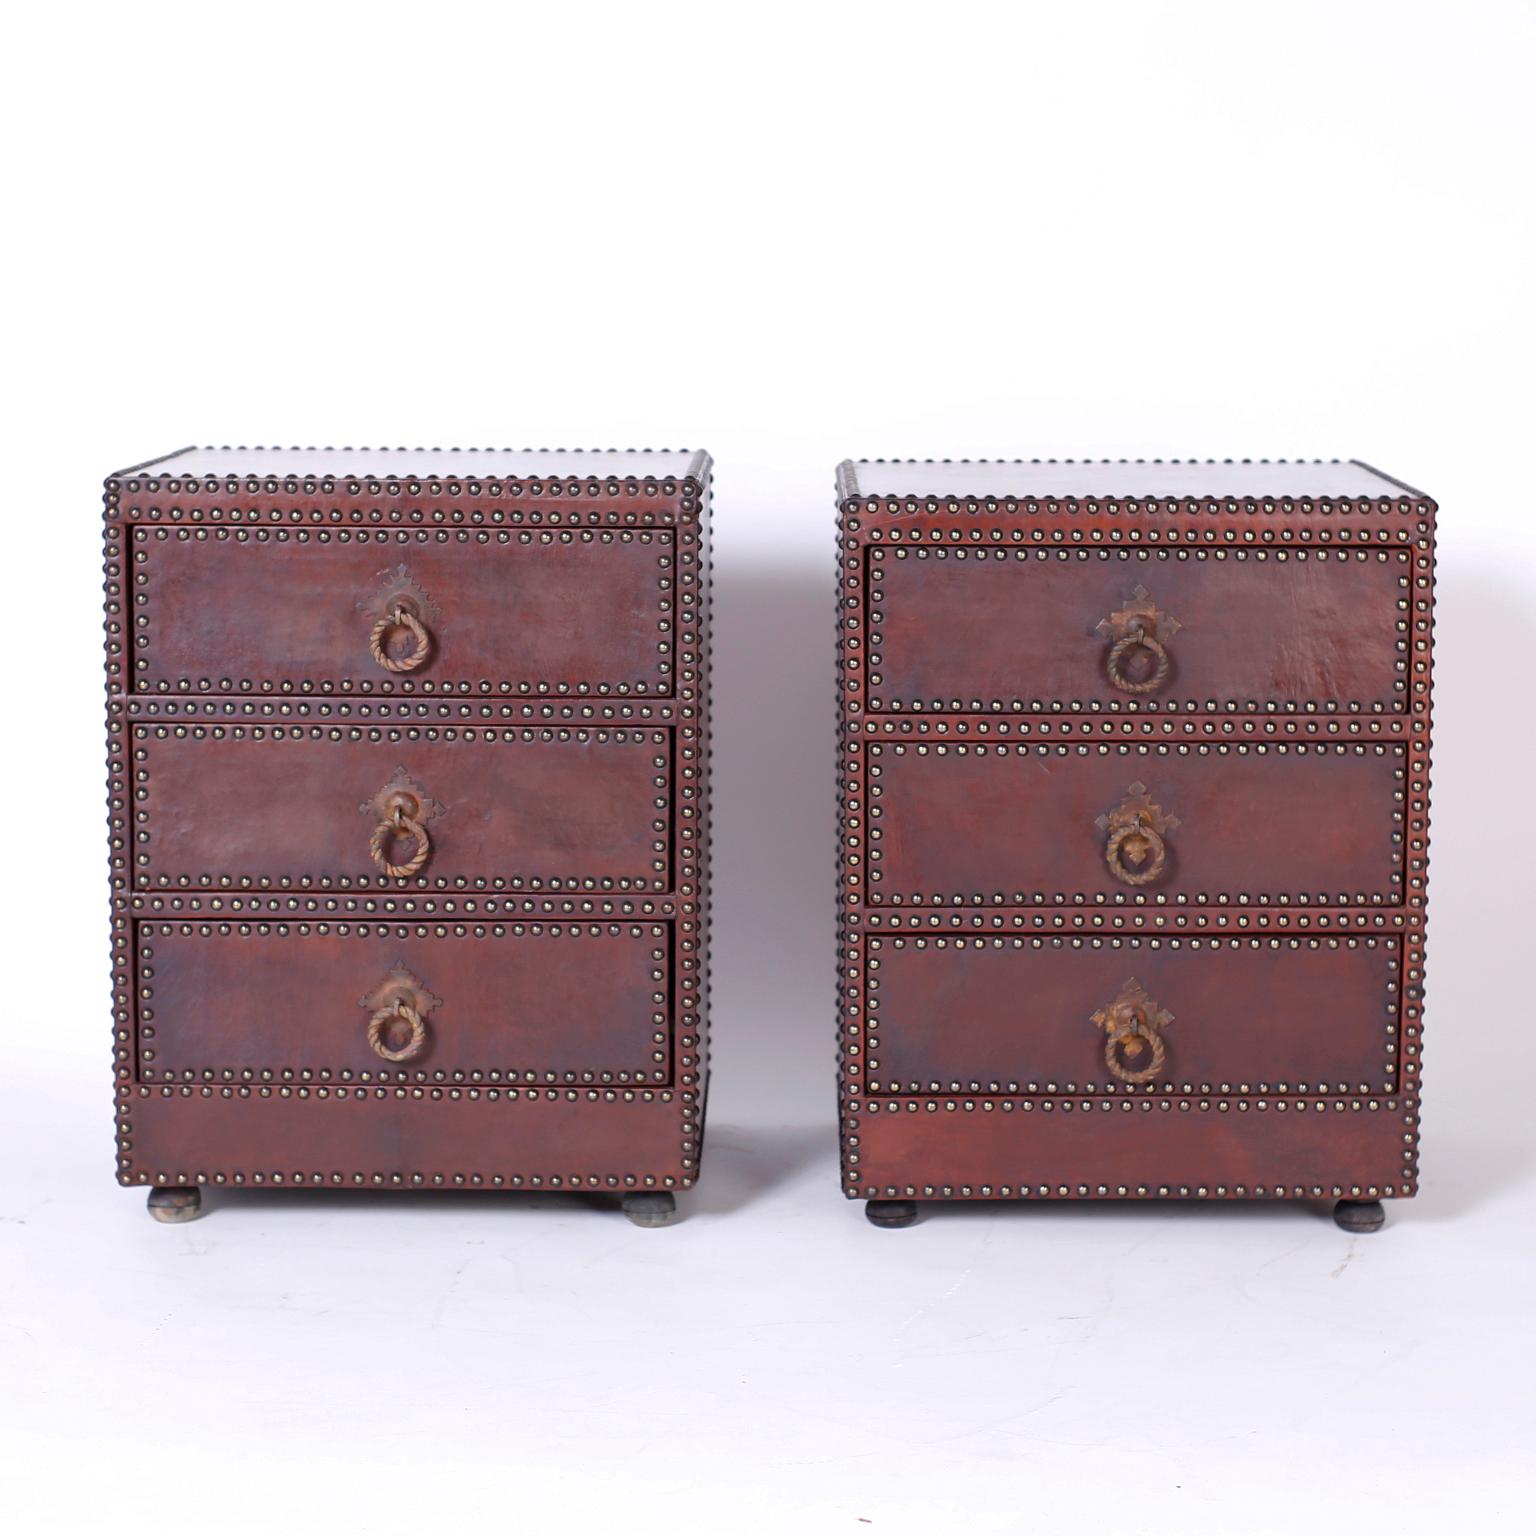 Handsome pair of three drawer chests or stands, entirely clad in brown leather highlighted with tacks, handwrought metal hardware and bun feet.